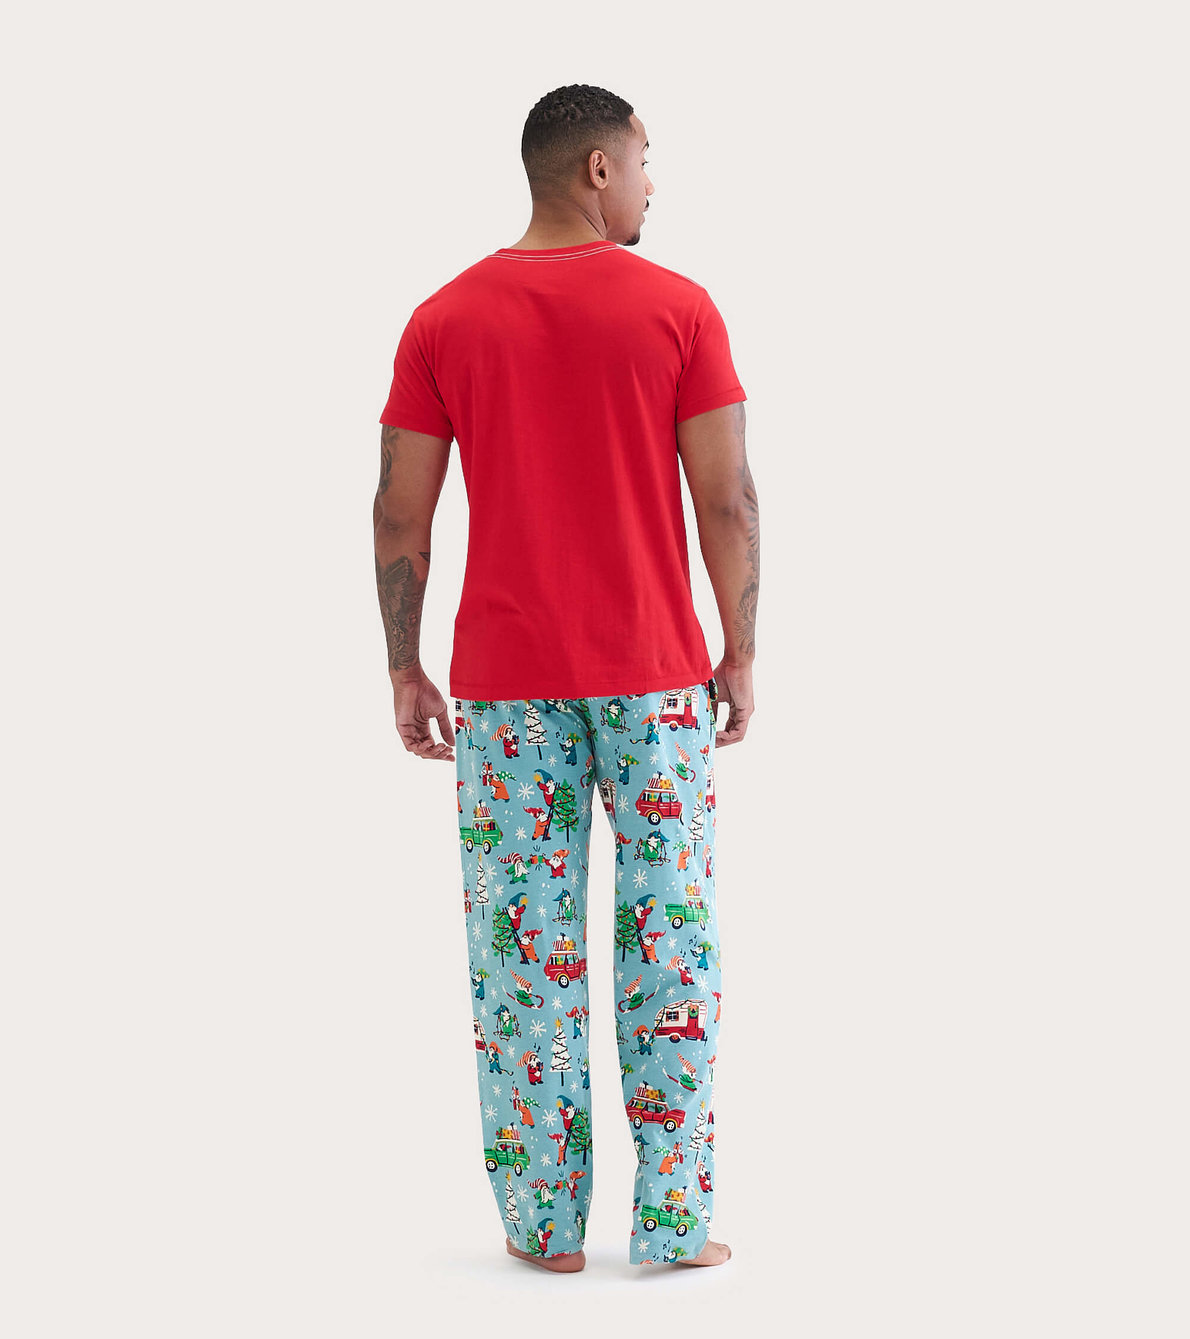 View larger image of Gnome For The Holidays Men's Jersey Pajama Pants